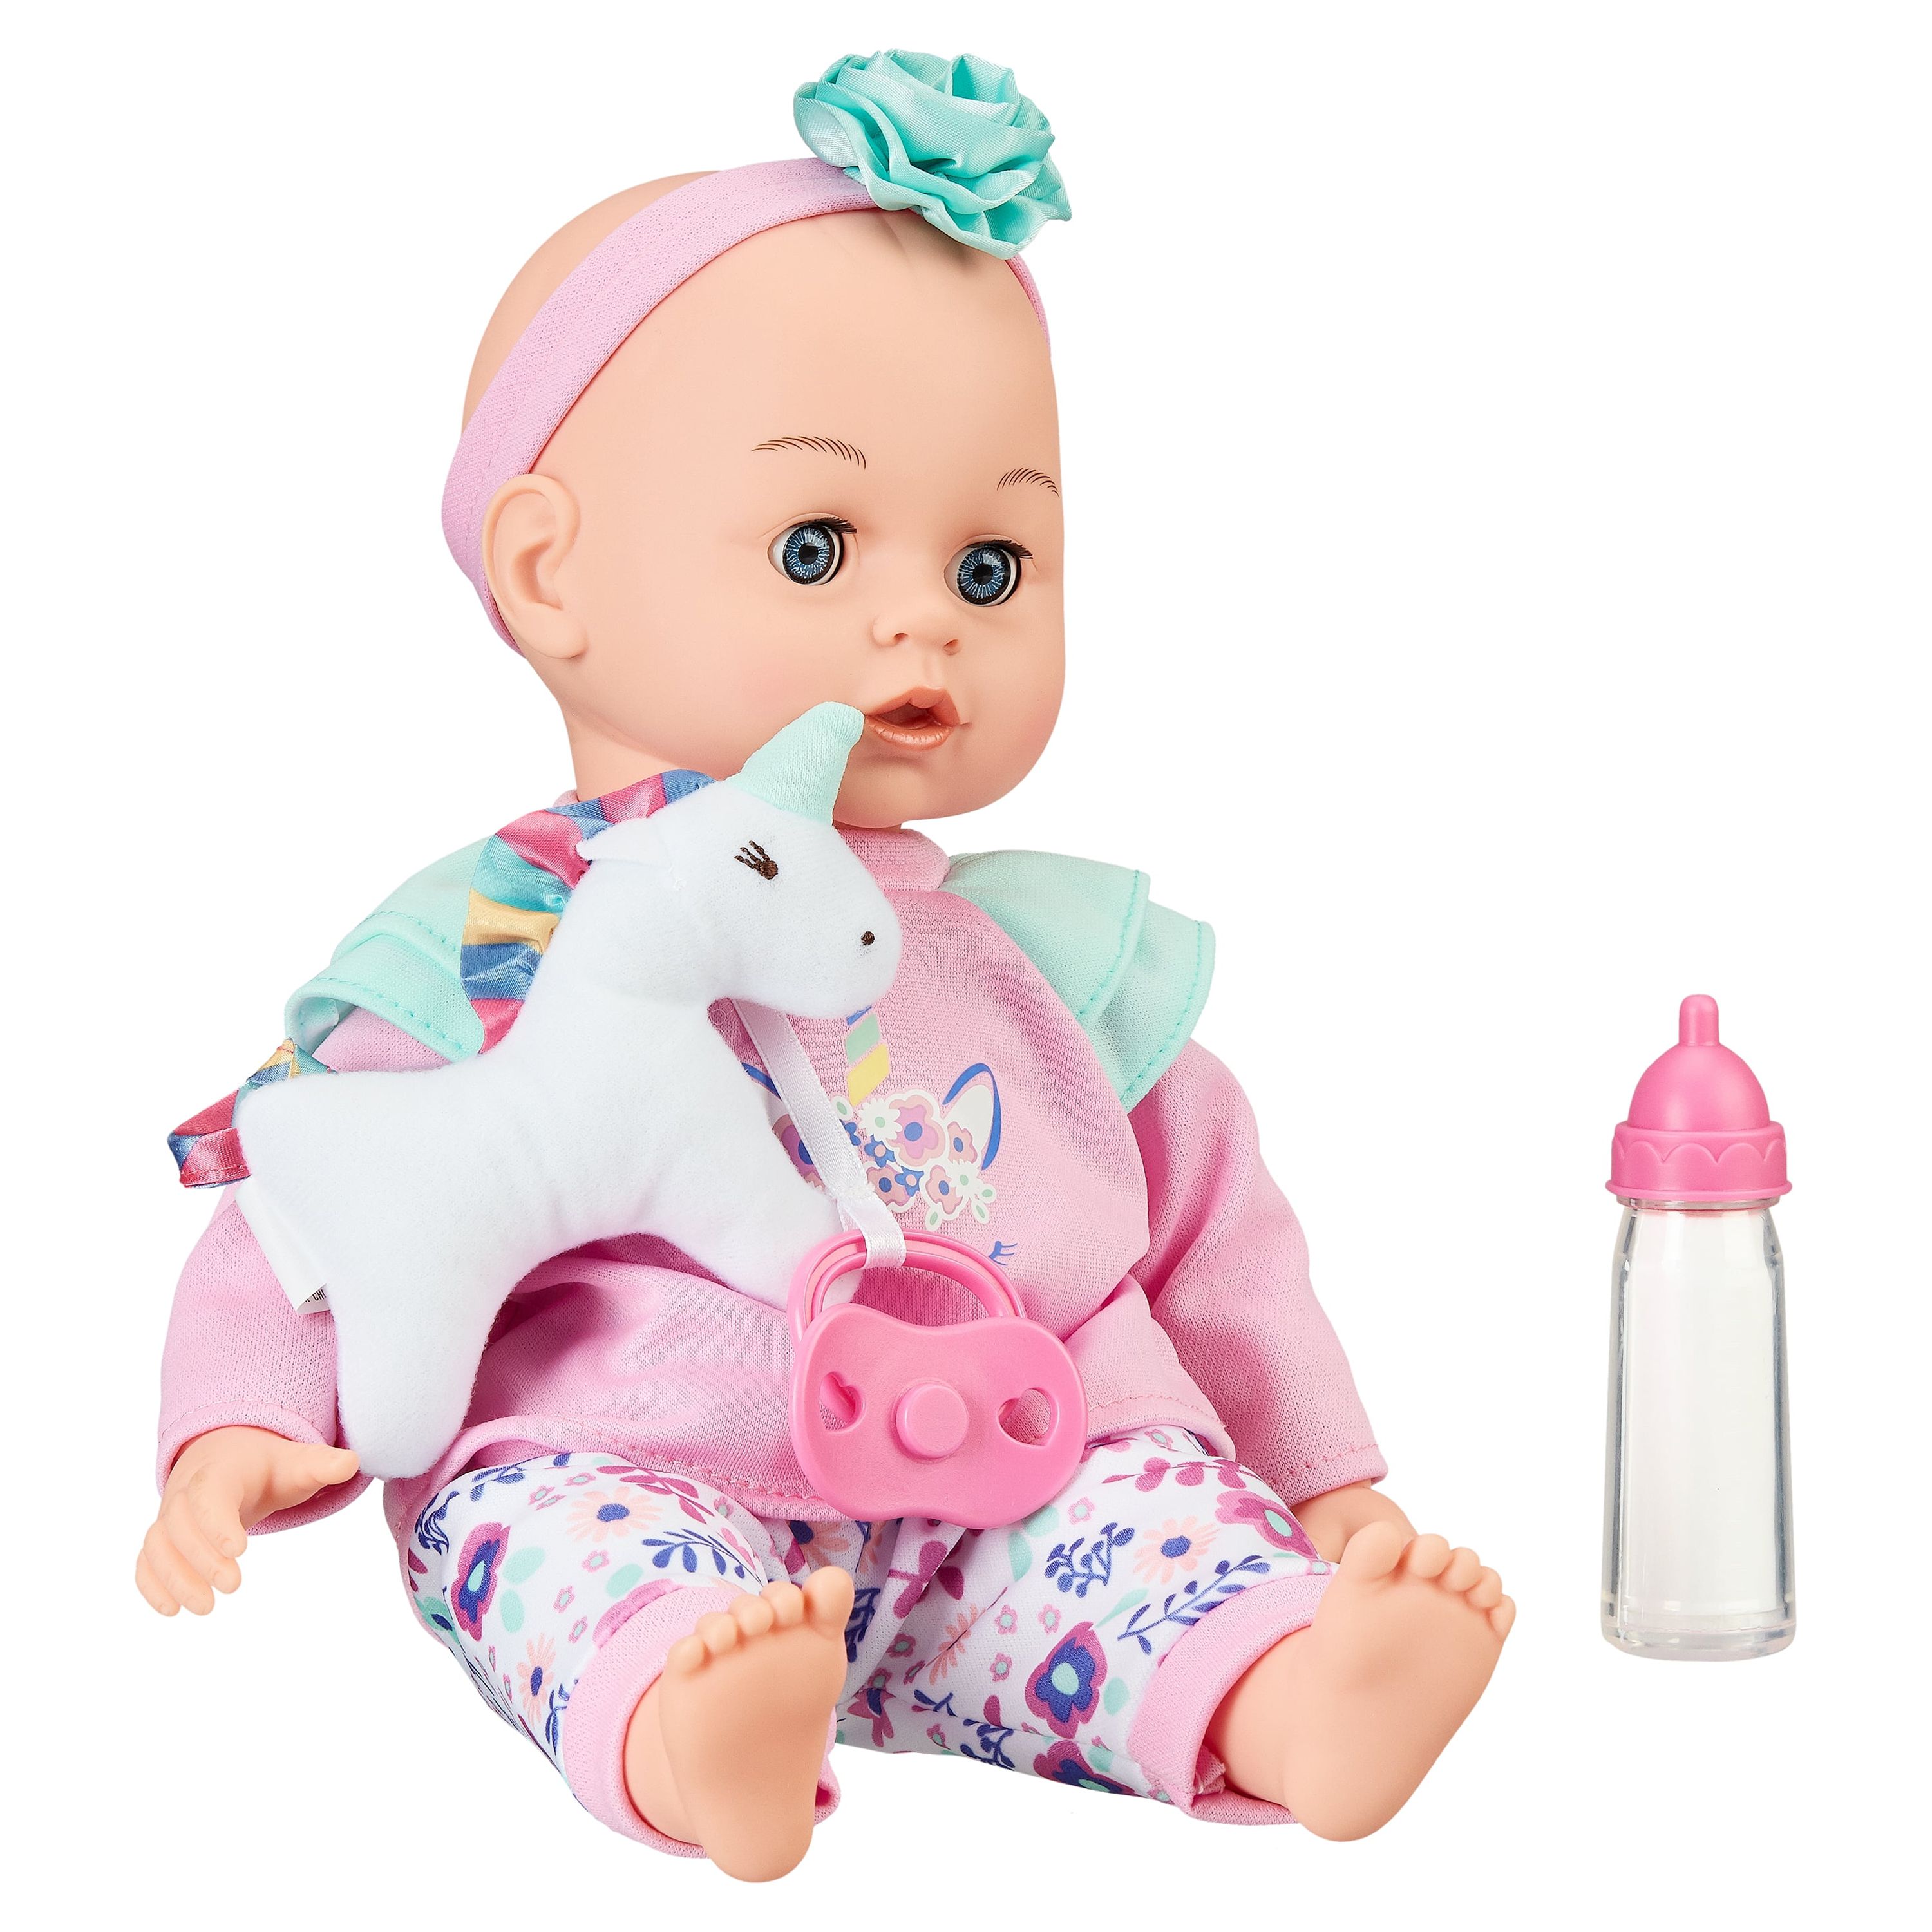 My Sweet Love 14" Baby Doll and Sling Carrier Play Set, 2 Pieces - image 5 of 5